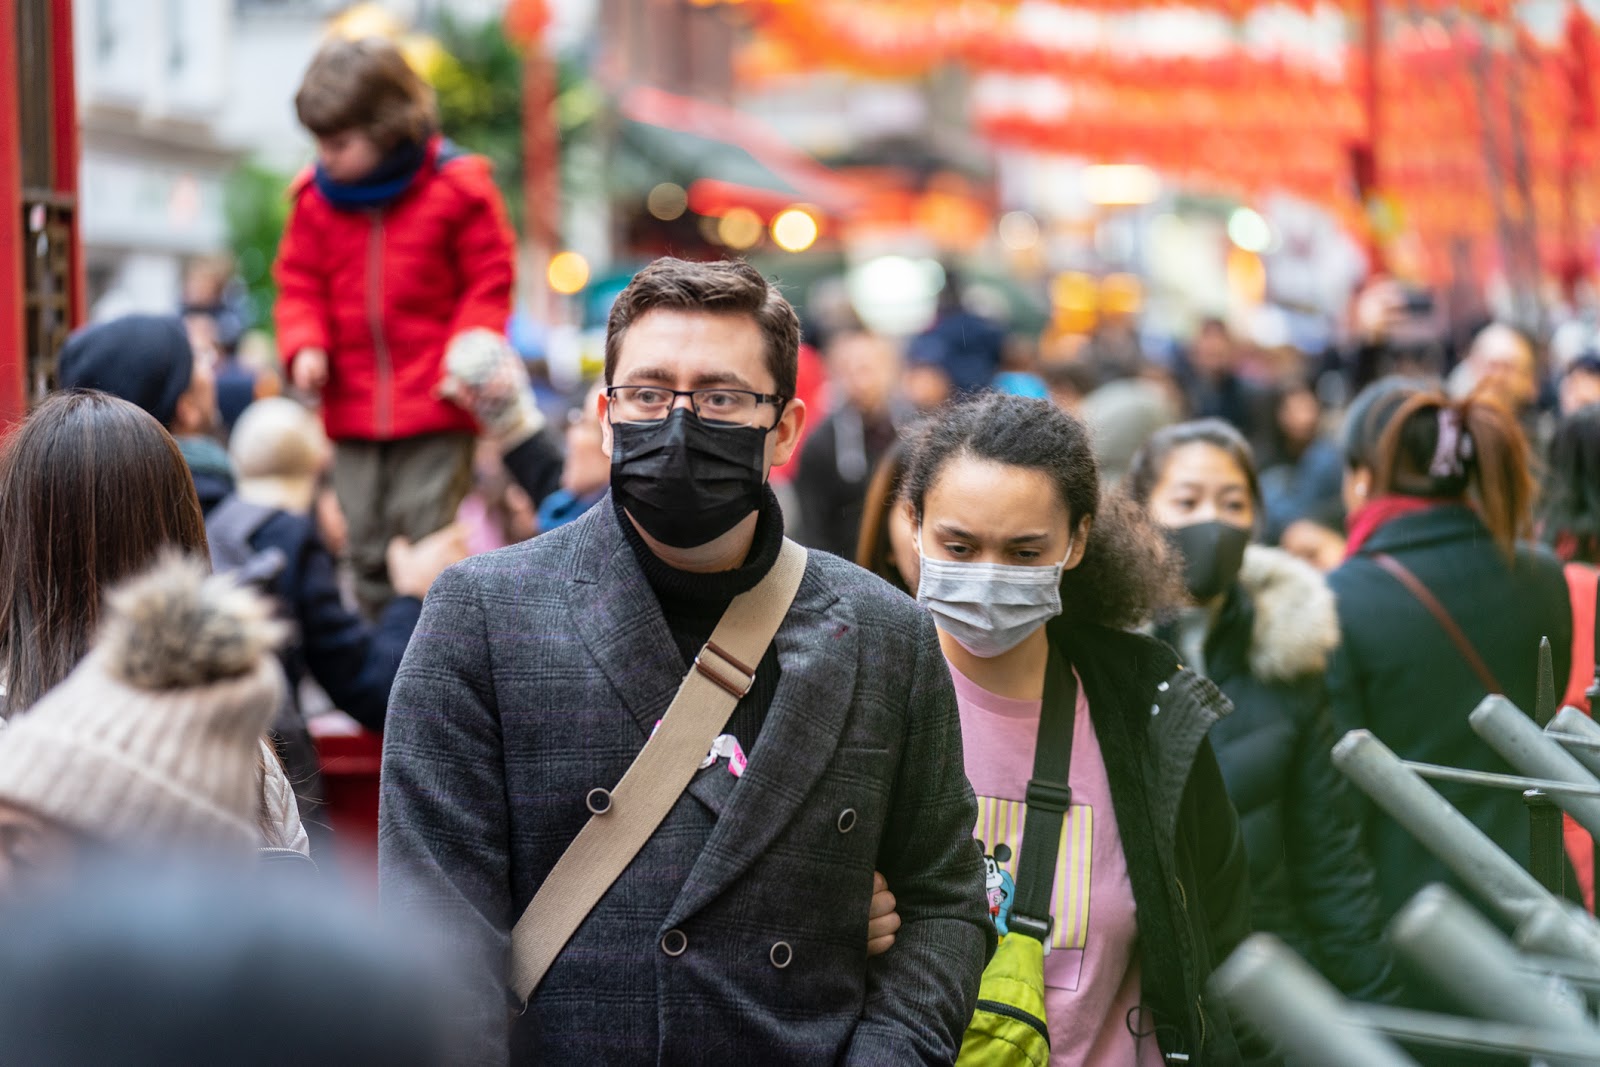 Crowd of people walking down the street with masks on